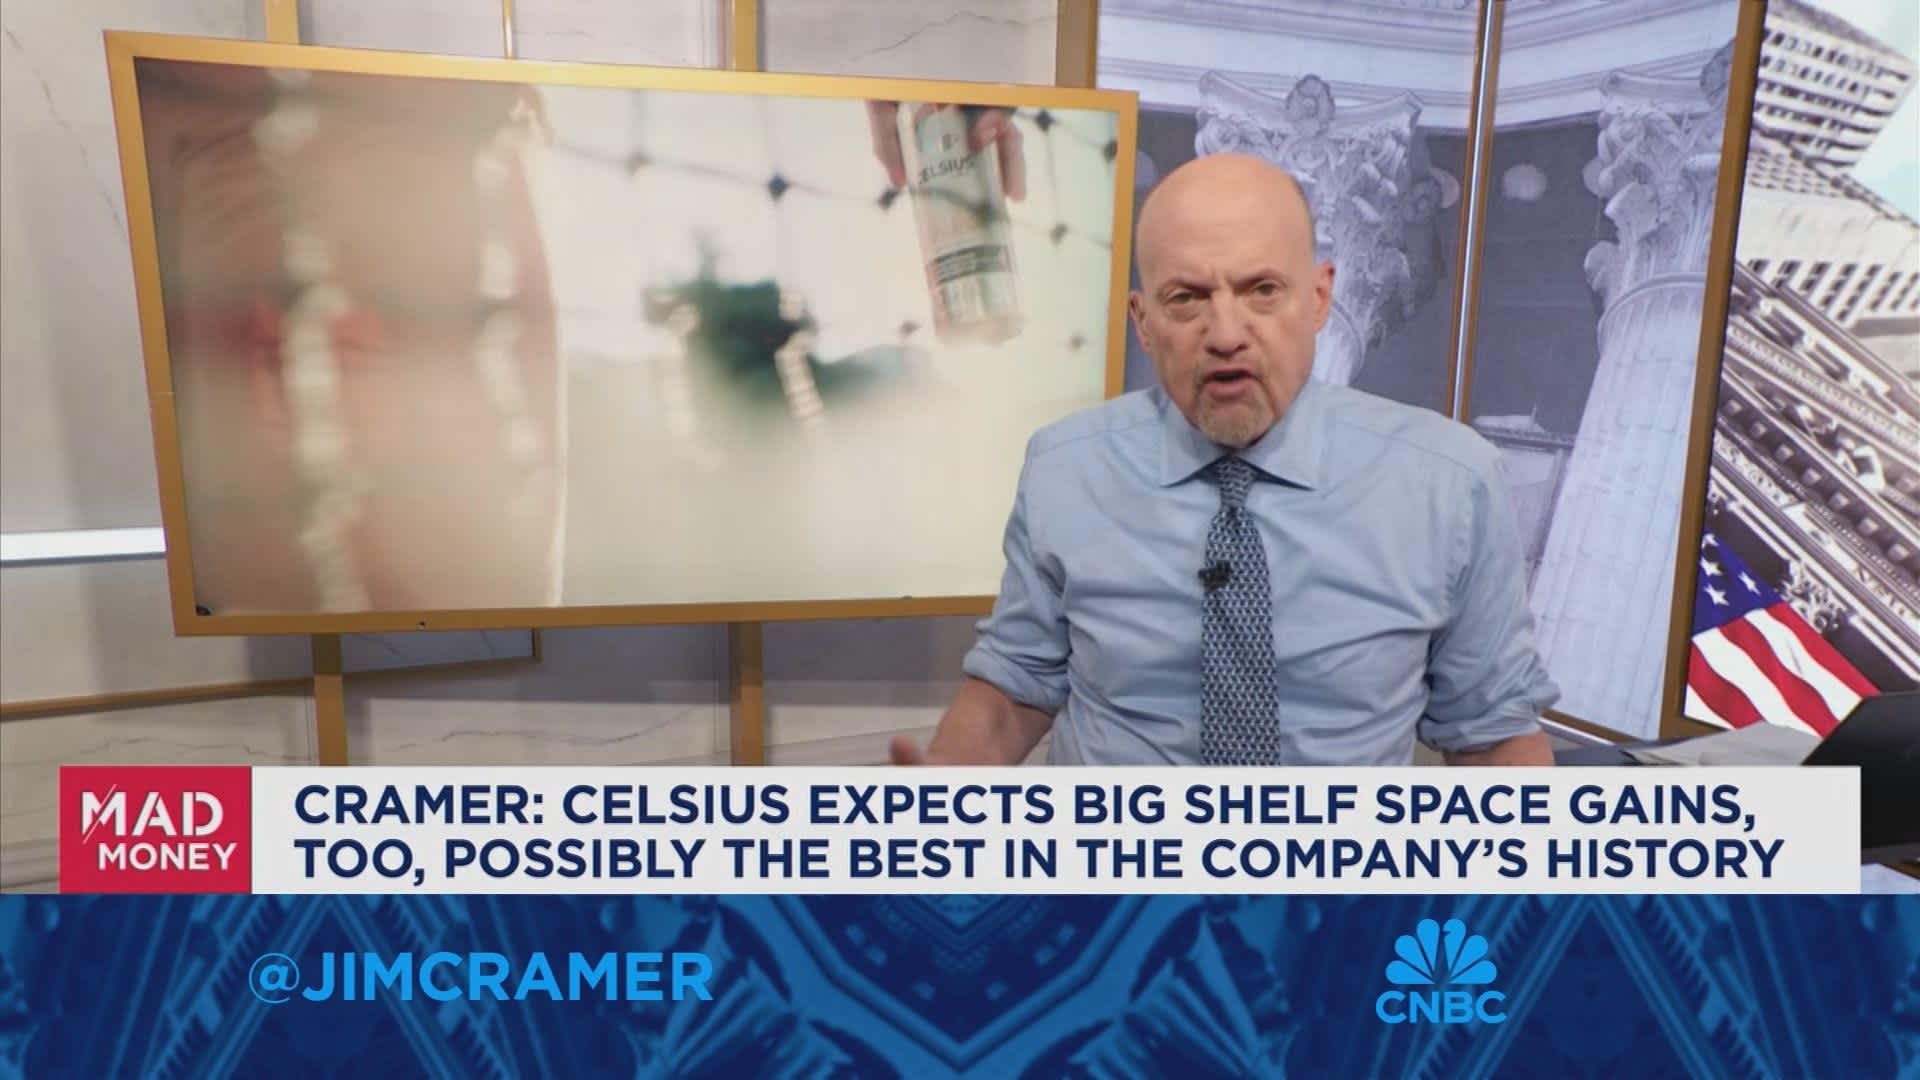 Celsius expects big shelf space gains, possibly the best in its history, says Jim Cramer [Video]